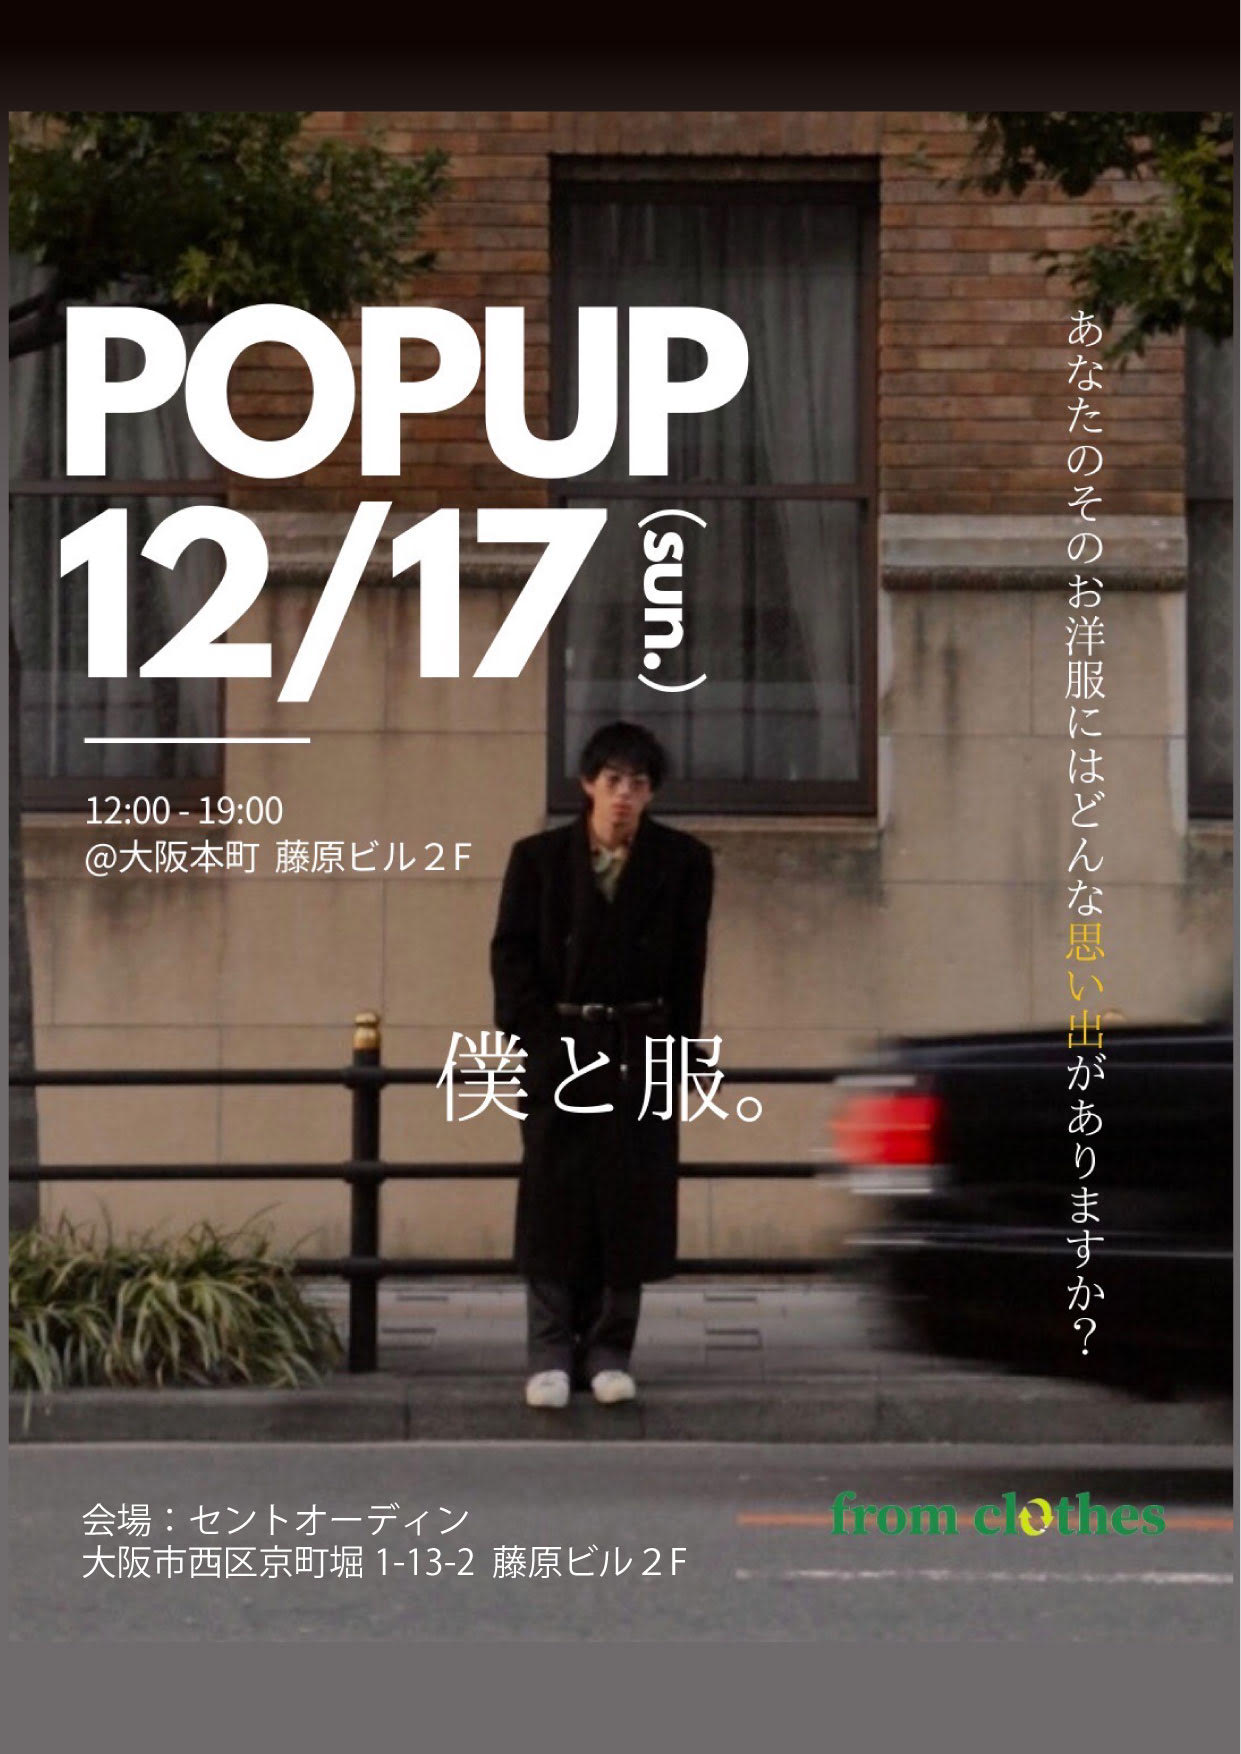 from clothes popup shop 僕と服。あなたのそのお洋服にはどんな思い出がありますか？